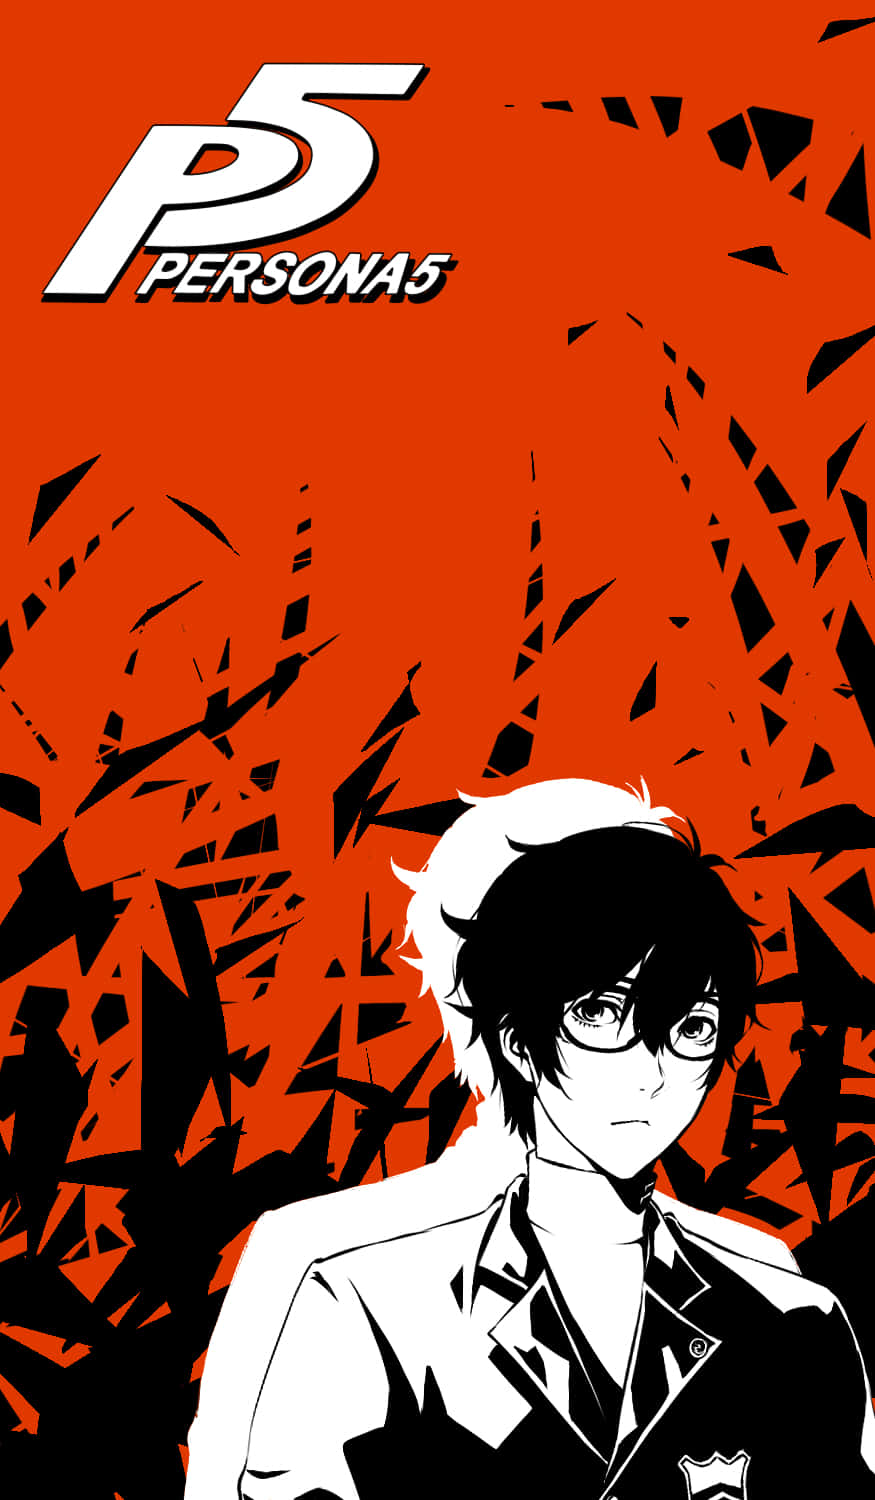 Capture the Moment with Persona 5 Iphone Wallpaper